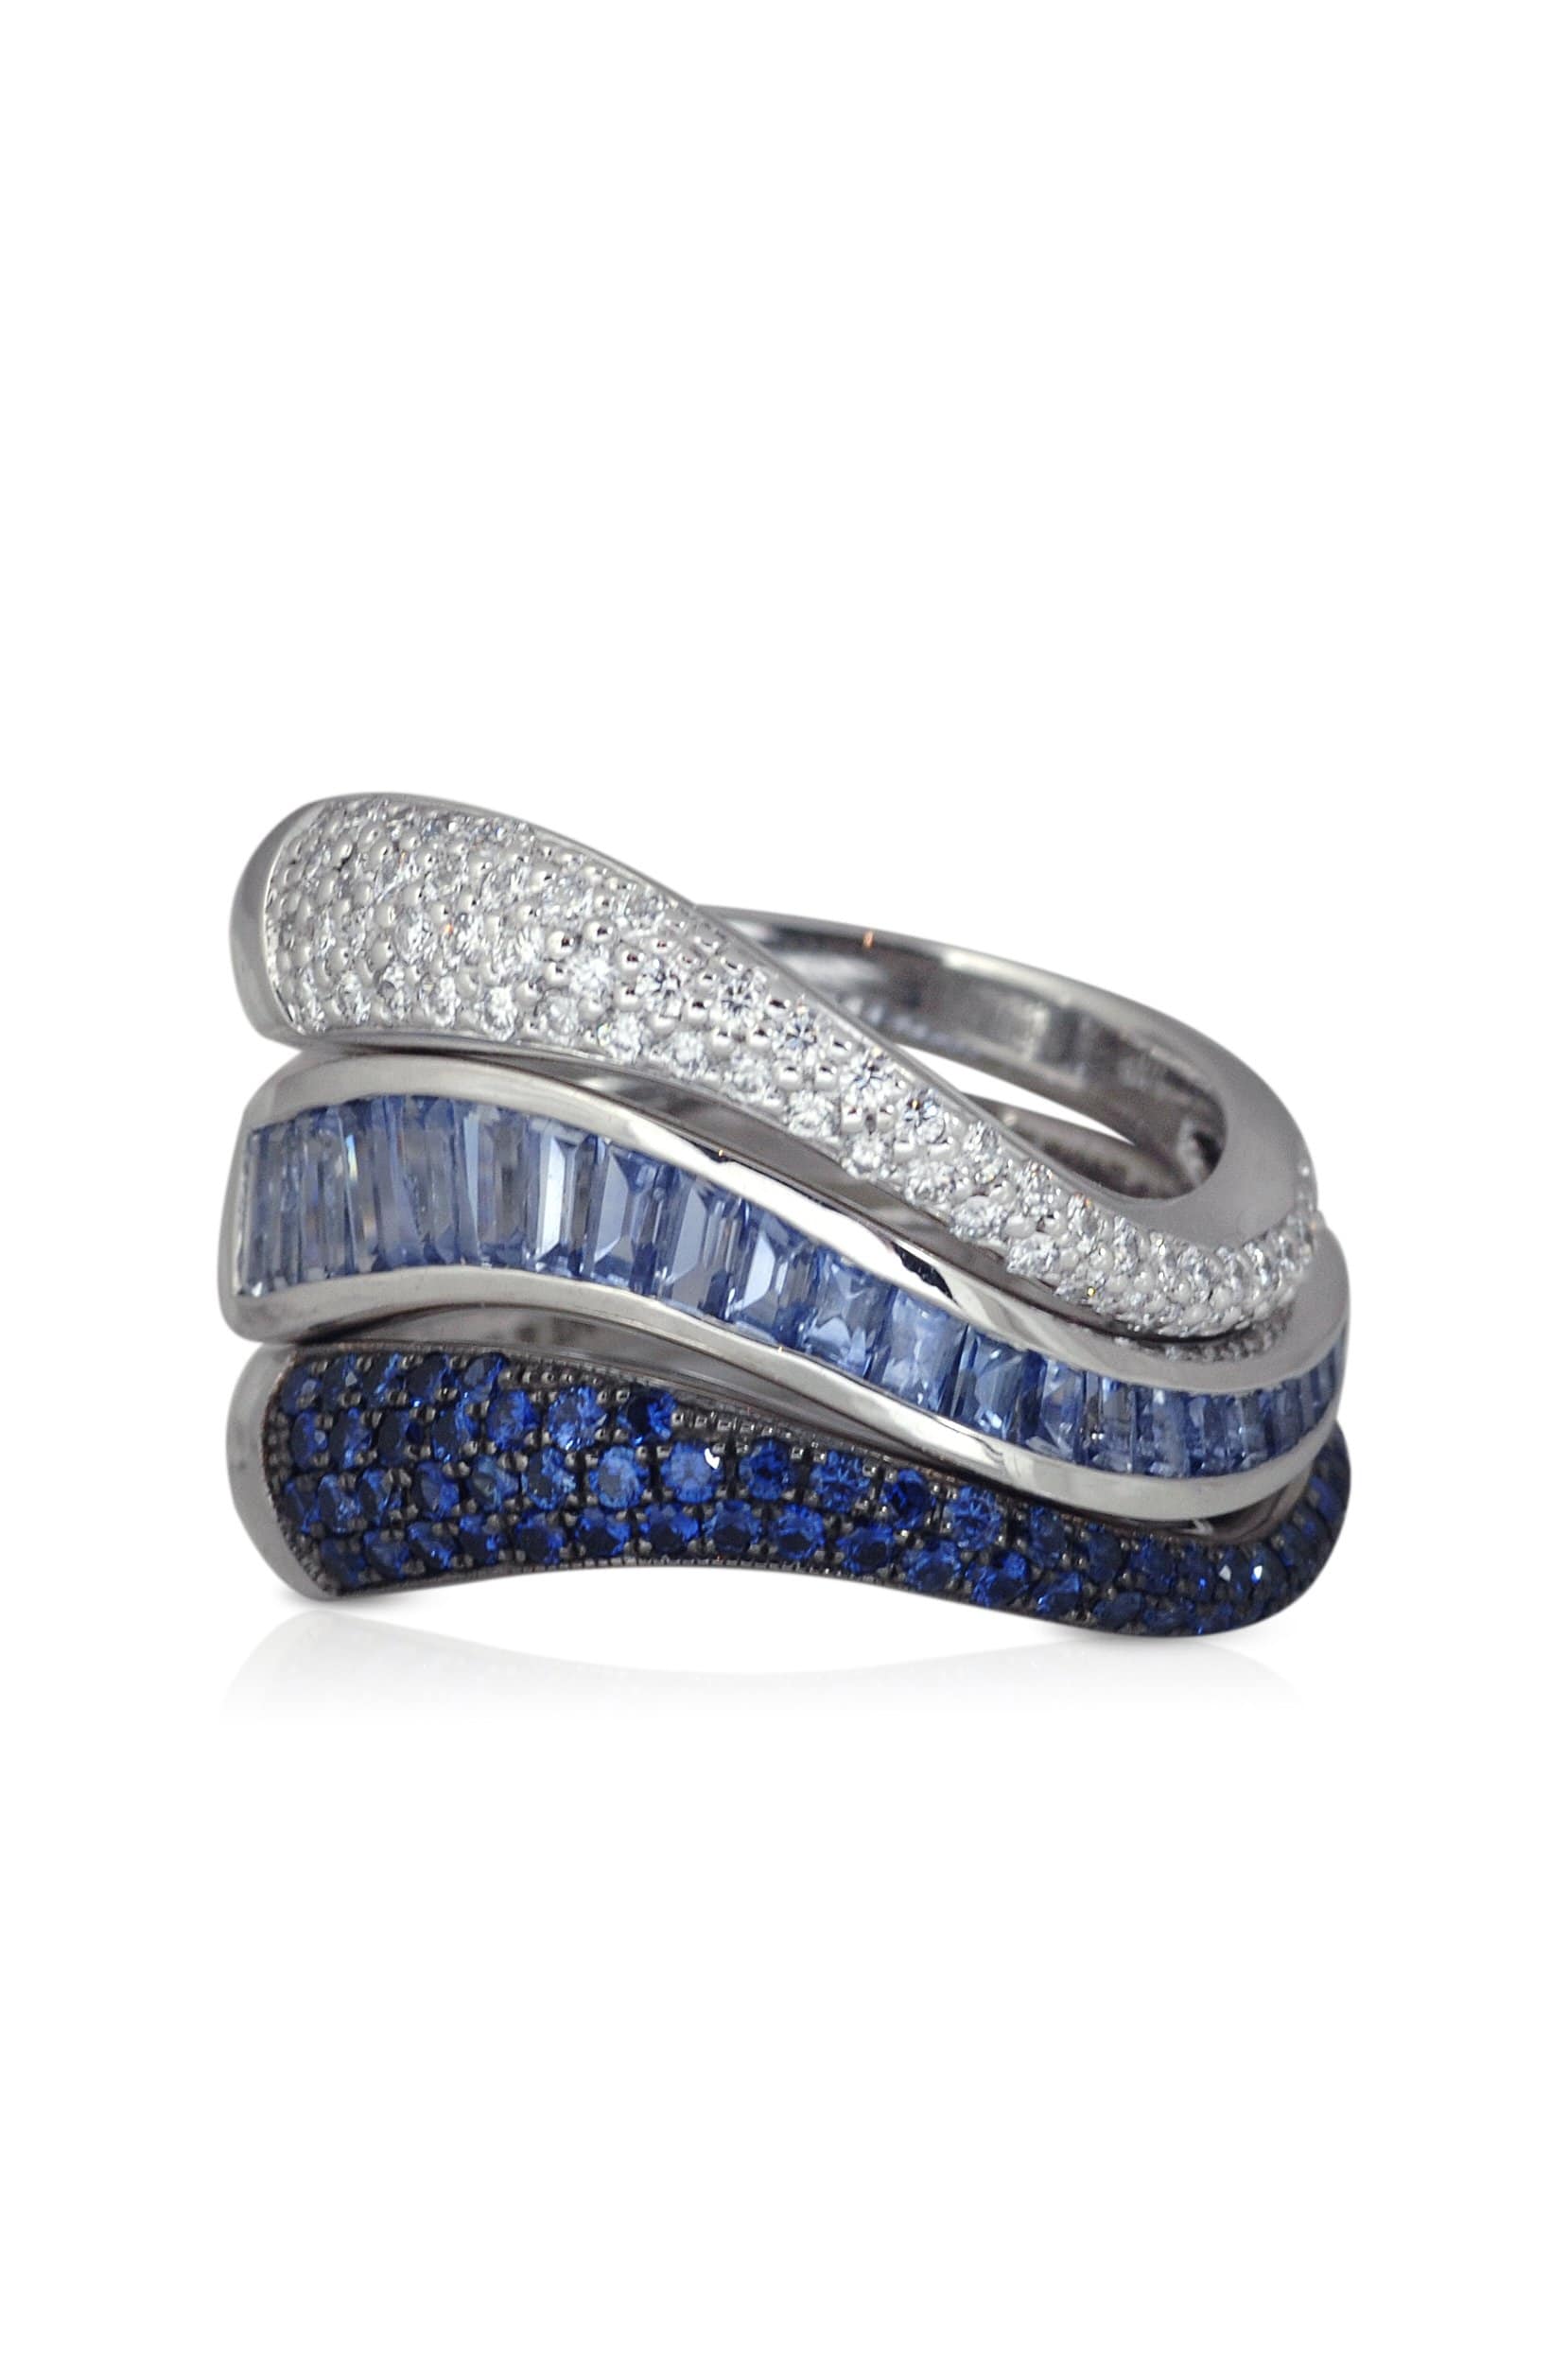 KAVANT & SHARART-Pave Diamond Talay Flow Wave Ring-WHITE GOLD